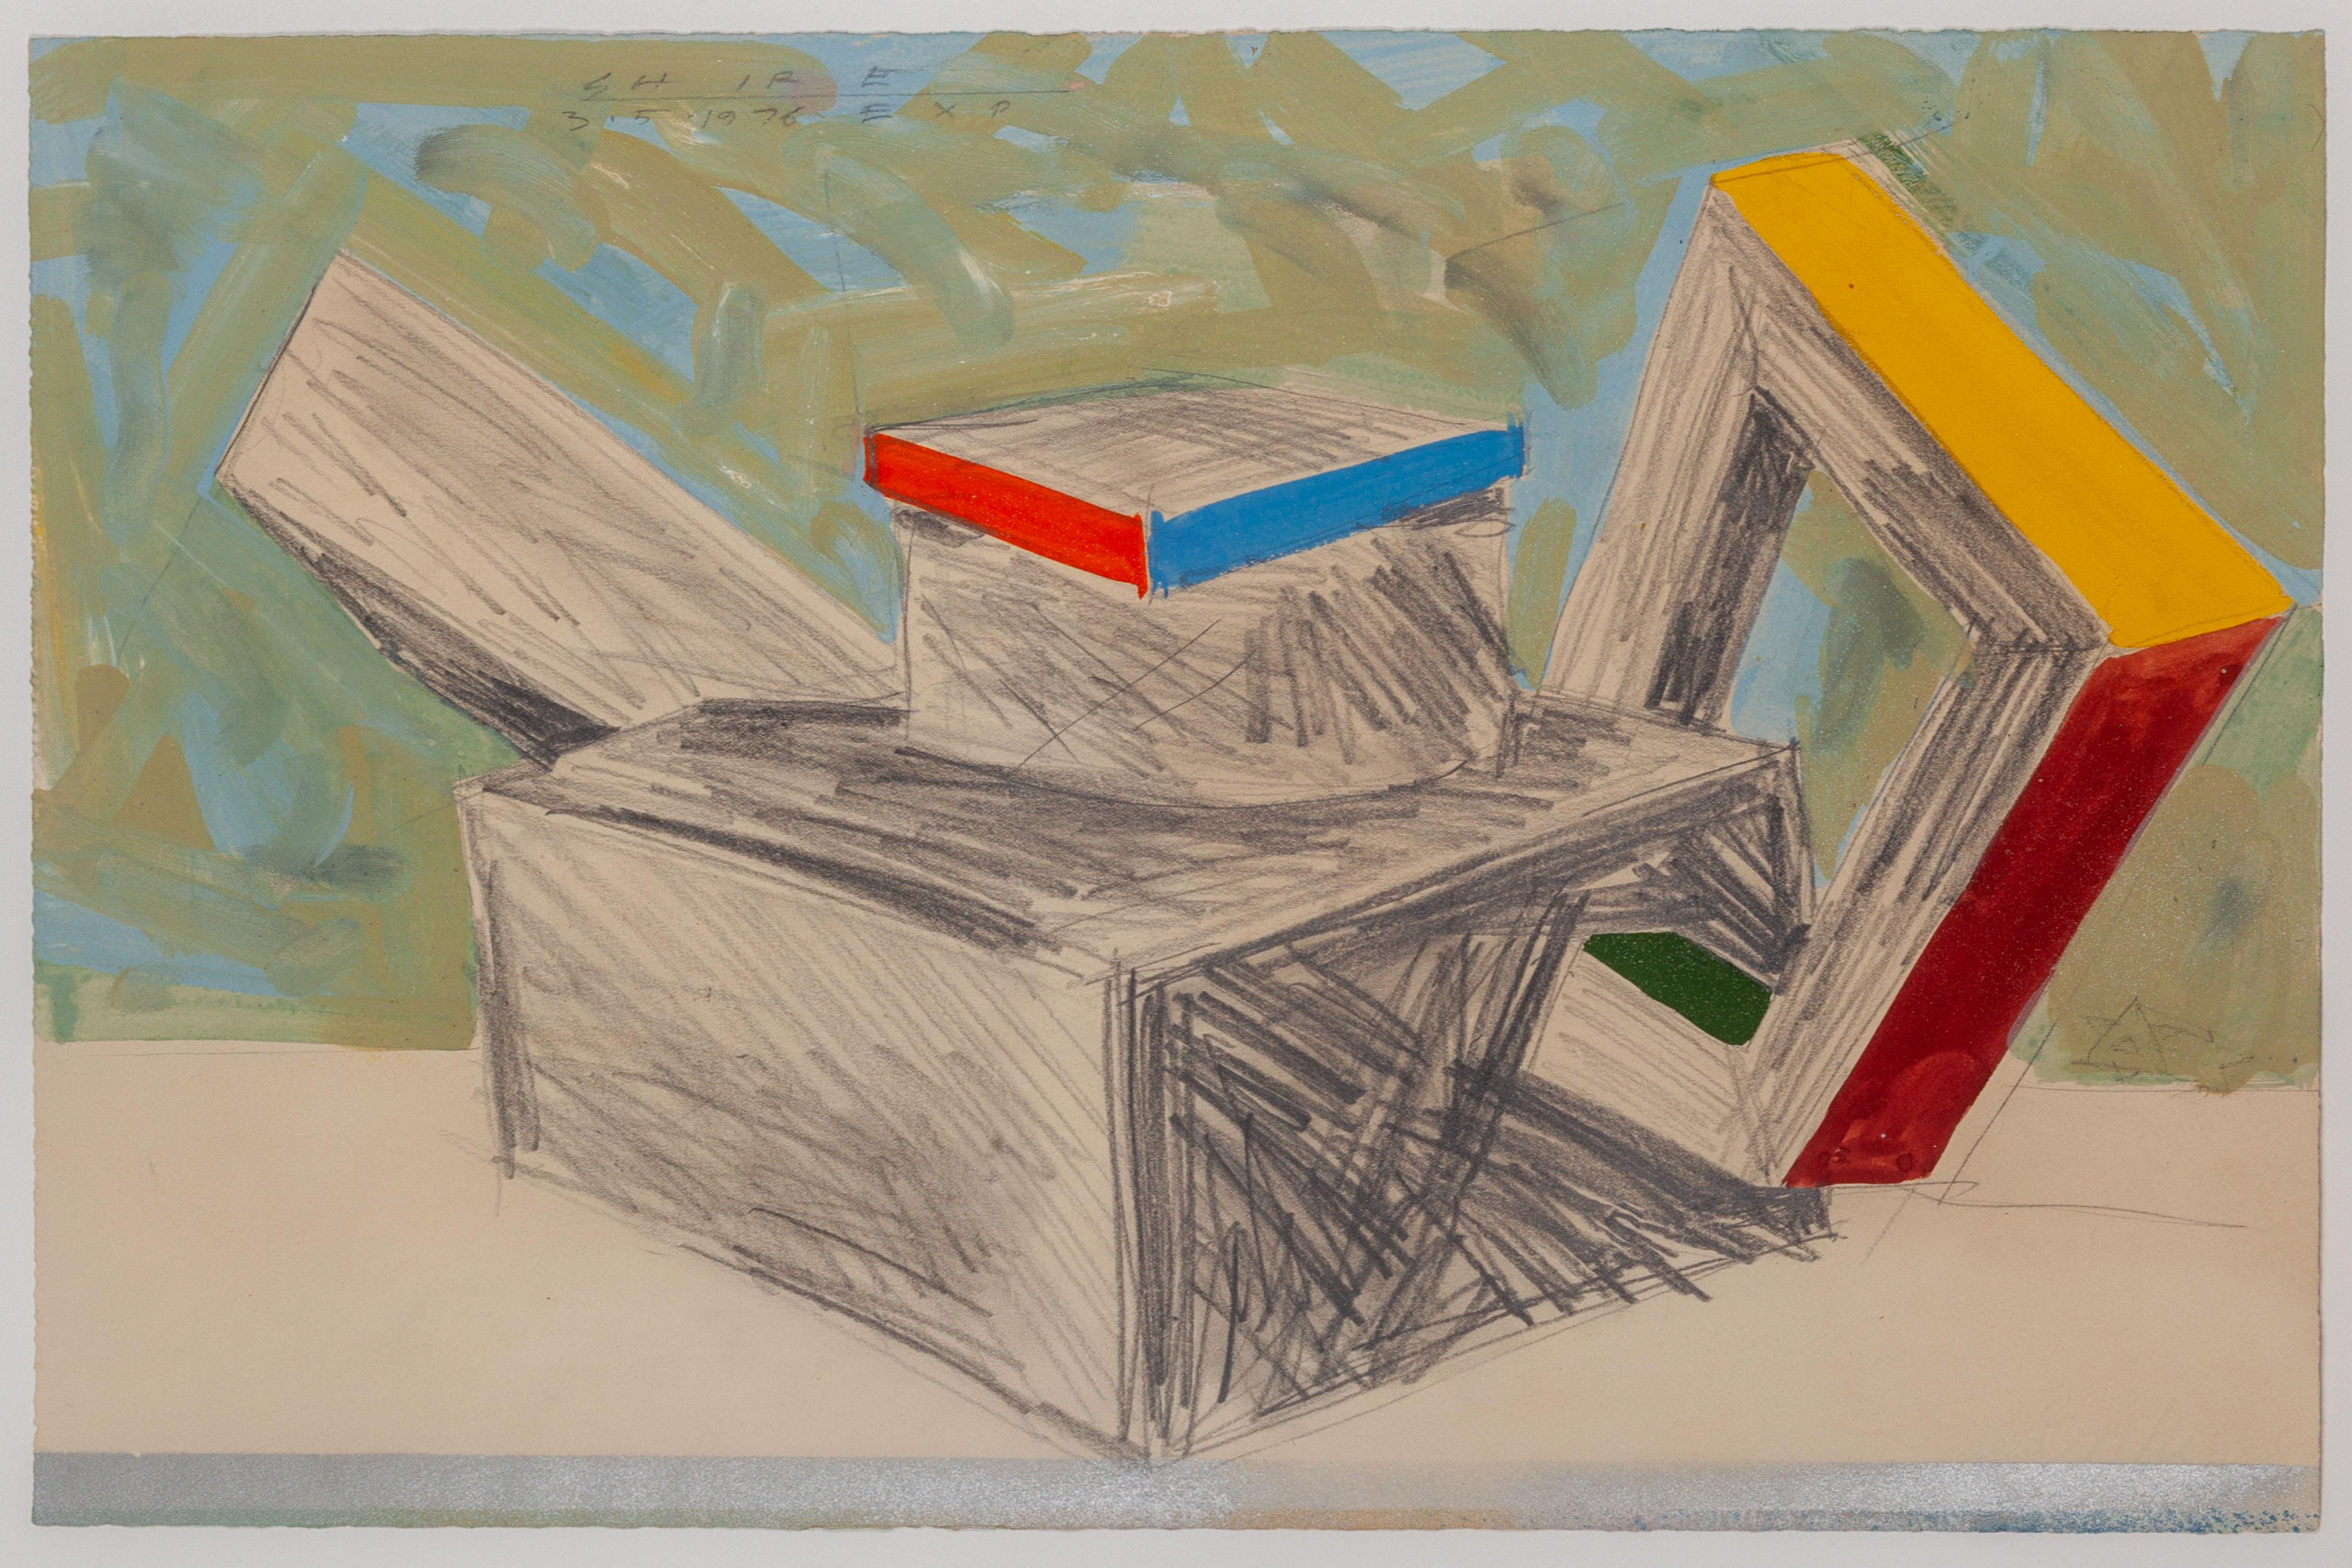 A early 1976 Peter Shire painting, already stating his never ending teapot obsession, and his taste for asymmetry and strong basic volumes in an architectural bauhaus-y and monumental way. Everything that made Peter Shire's style an emblematic part